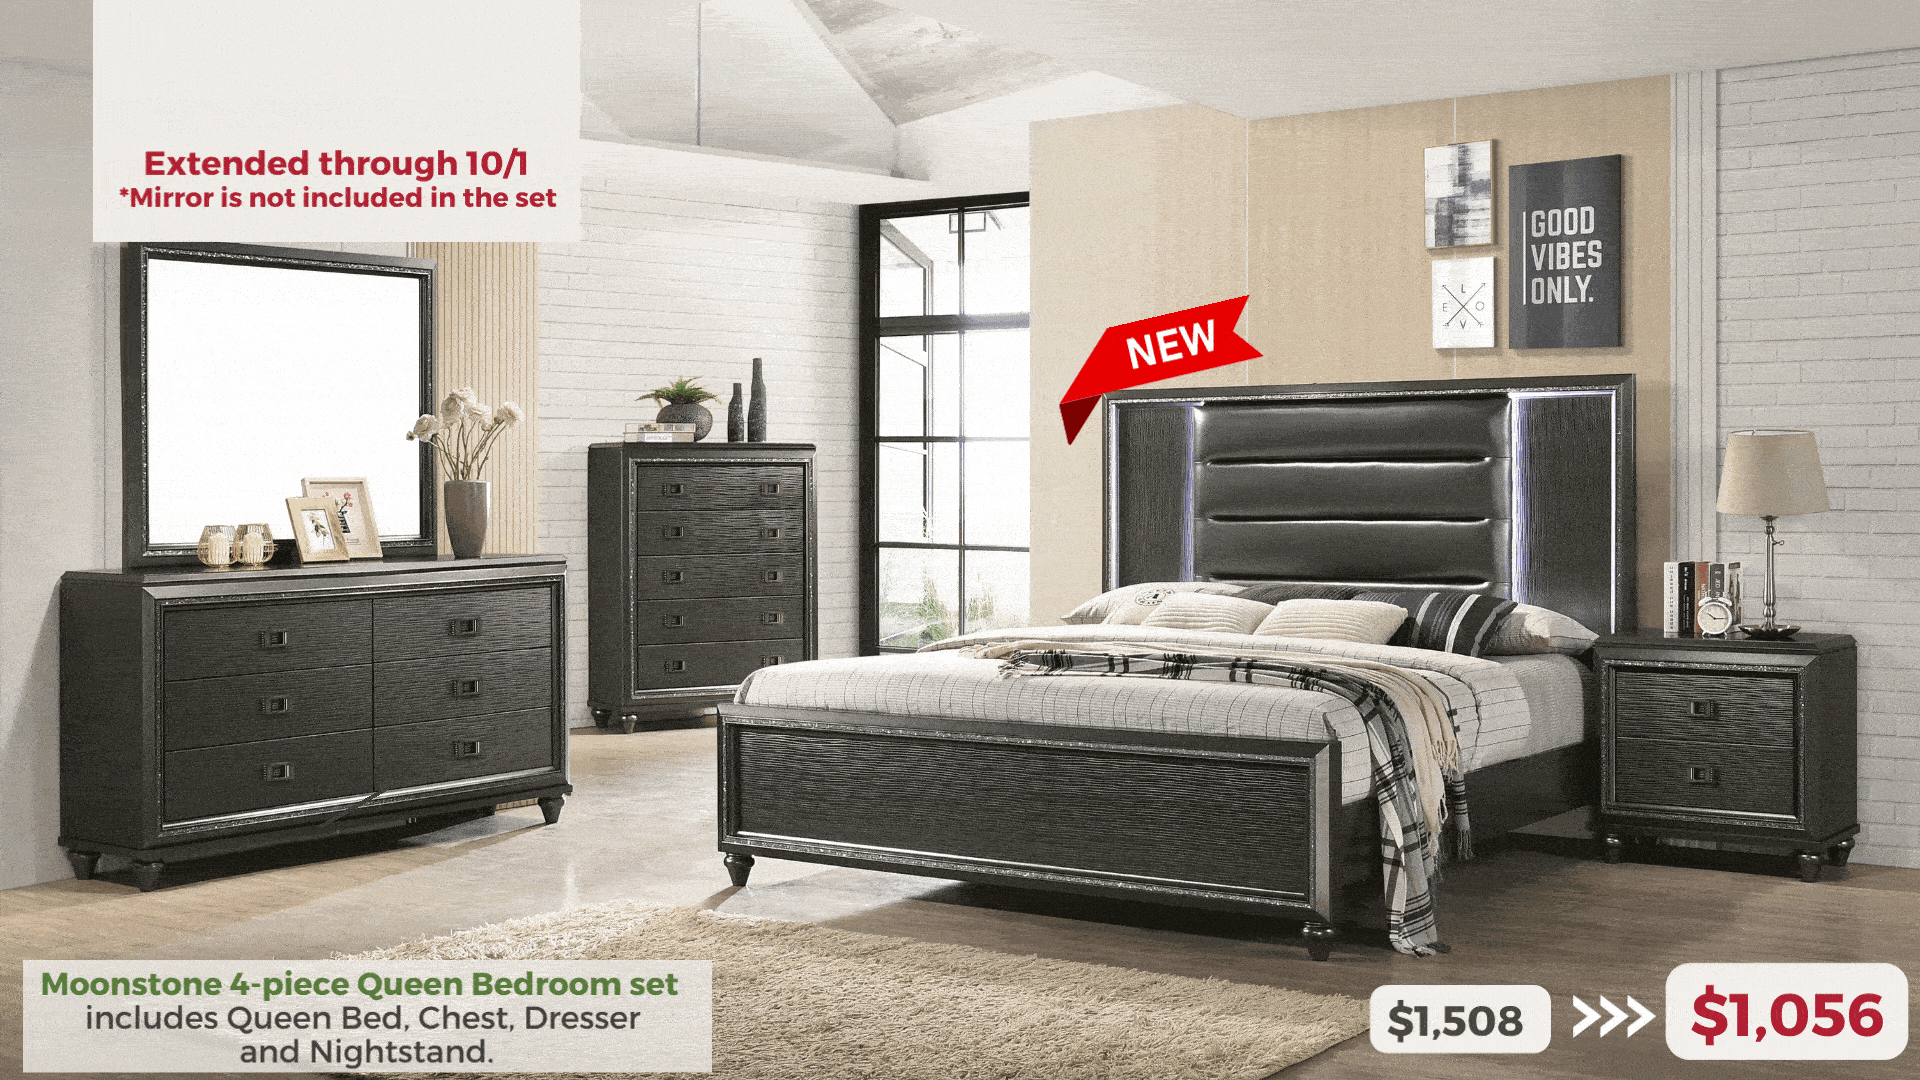 Moonstone 4-piece Queen Bedroom set   includes Queen Bed, Chest, Dresser  and Nightstand.30% OFF Extended through 10/1 *Mirror is not included in the set